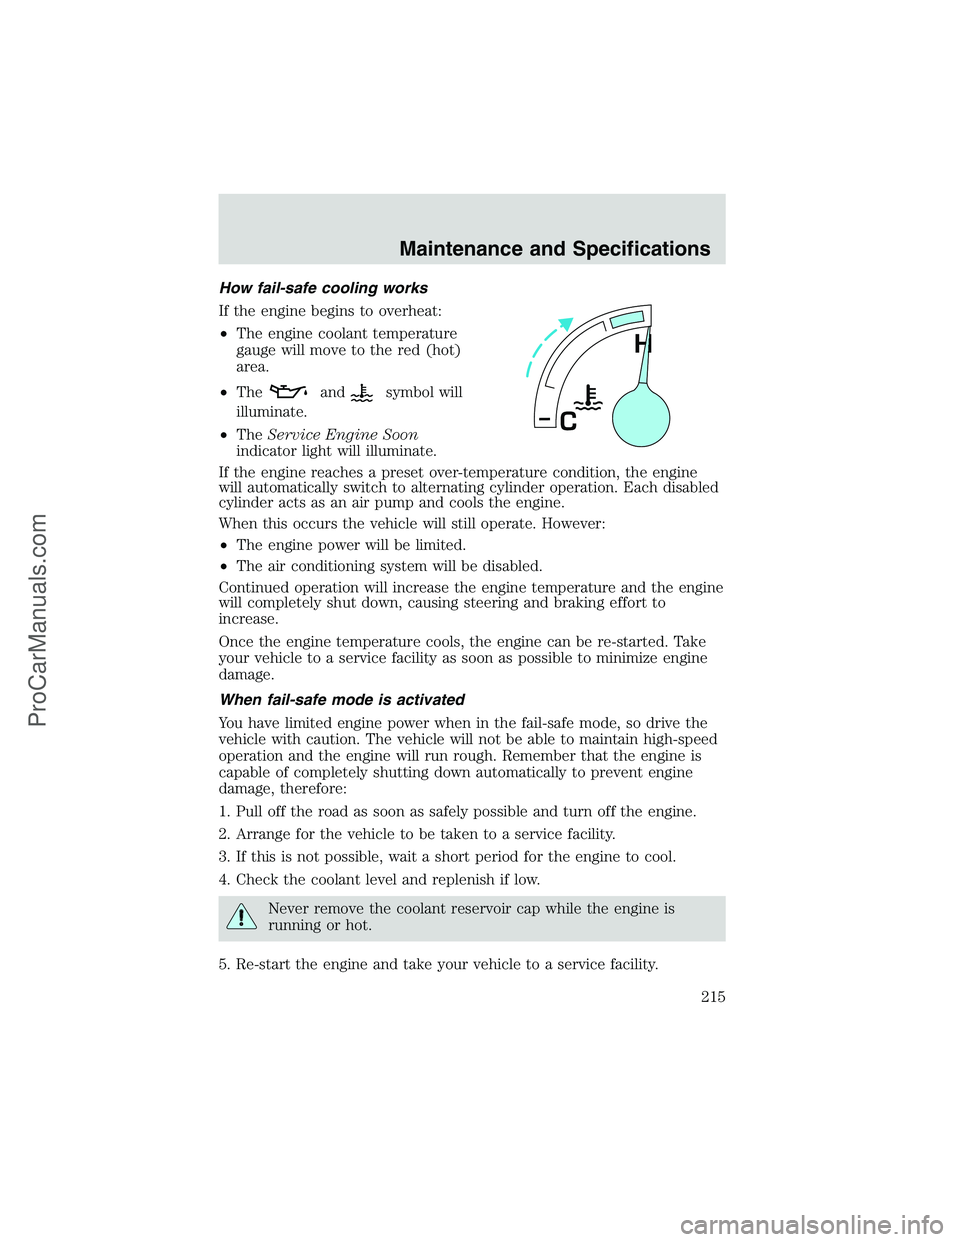 FORD E-150 2002  Owners Manual How fail-safe cooling works
If the engine begins to overheat:
•The engine coolant temperature
gauge will move to the red (hot)
area.
•The
andsymbol will
illuminate.
•TheService Engine Soon
indic